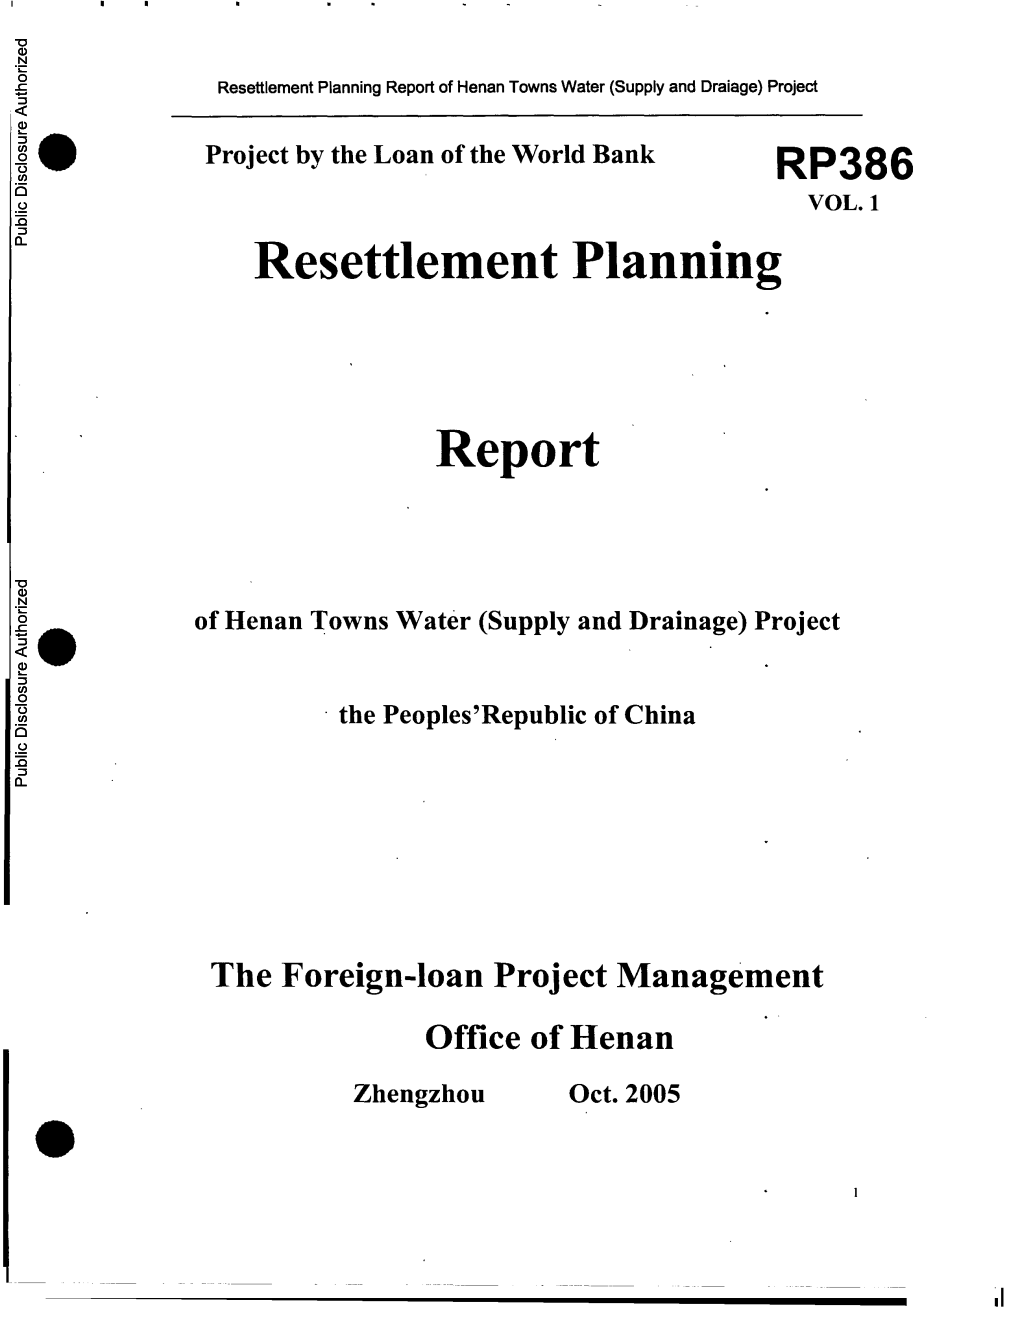 Resettlement Planning Report of Henan Towns Water (Supply and Draiage) Project